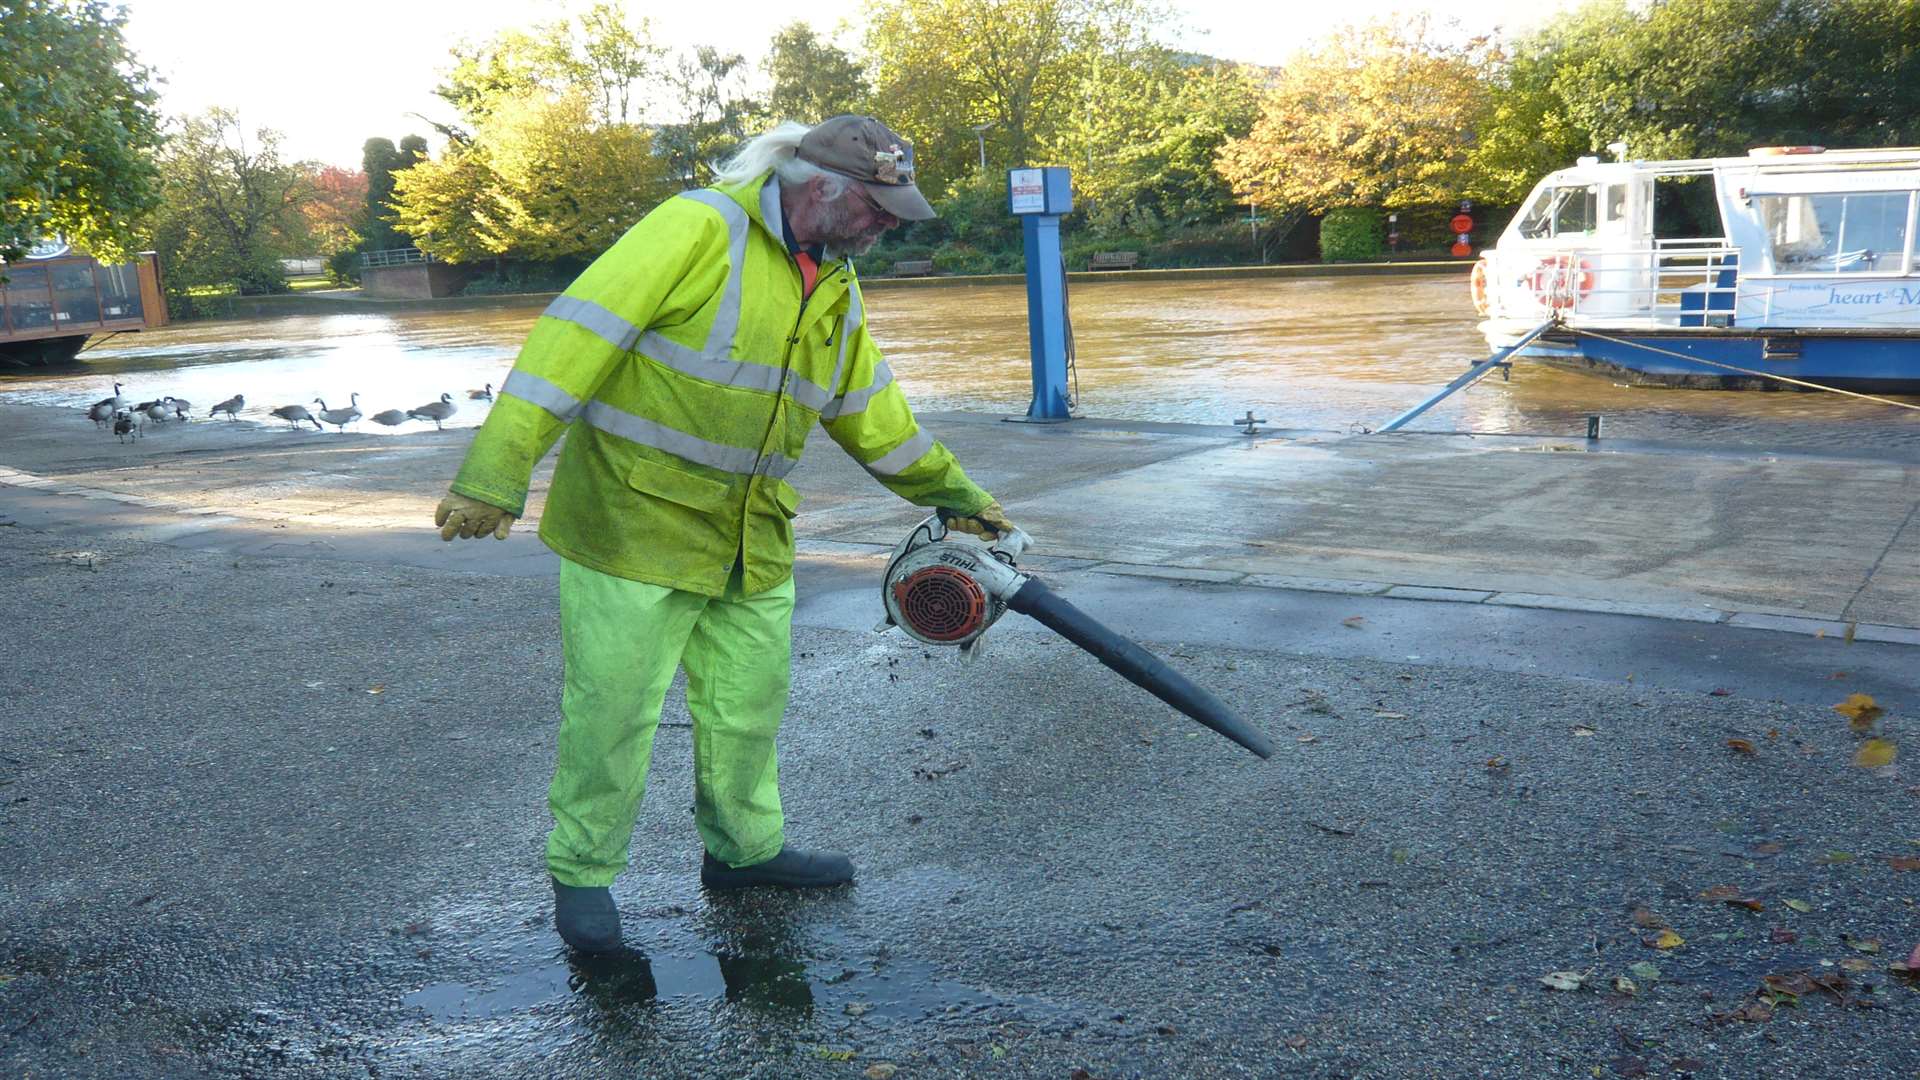 A council worker clearing leaves near the River Medway